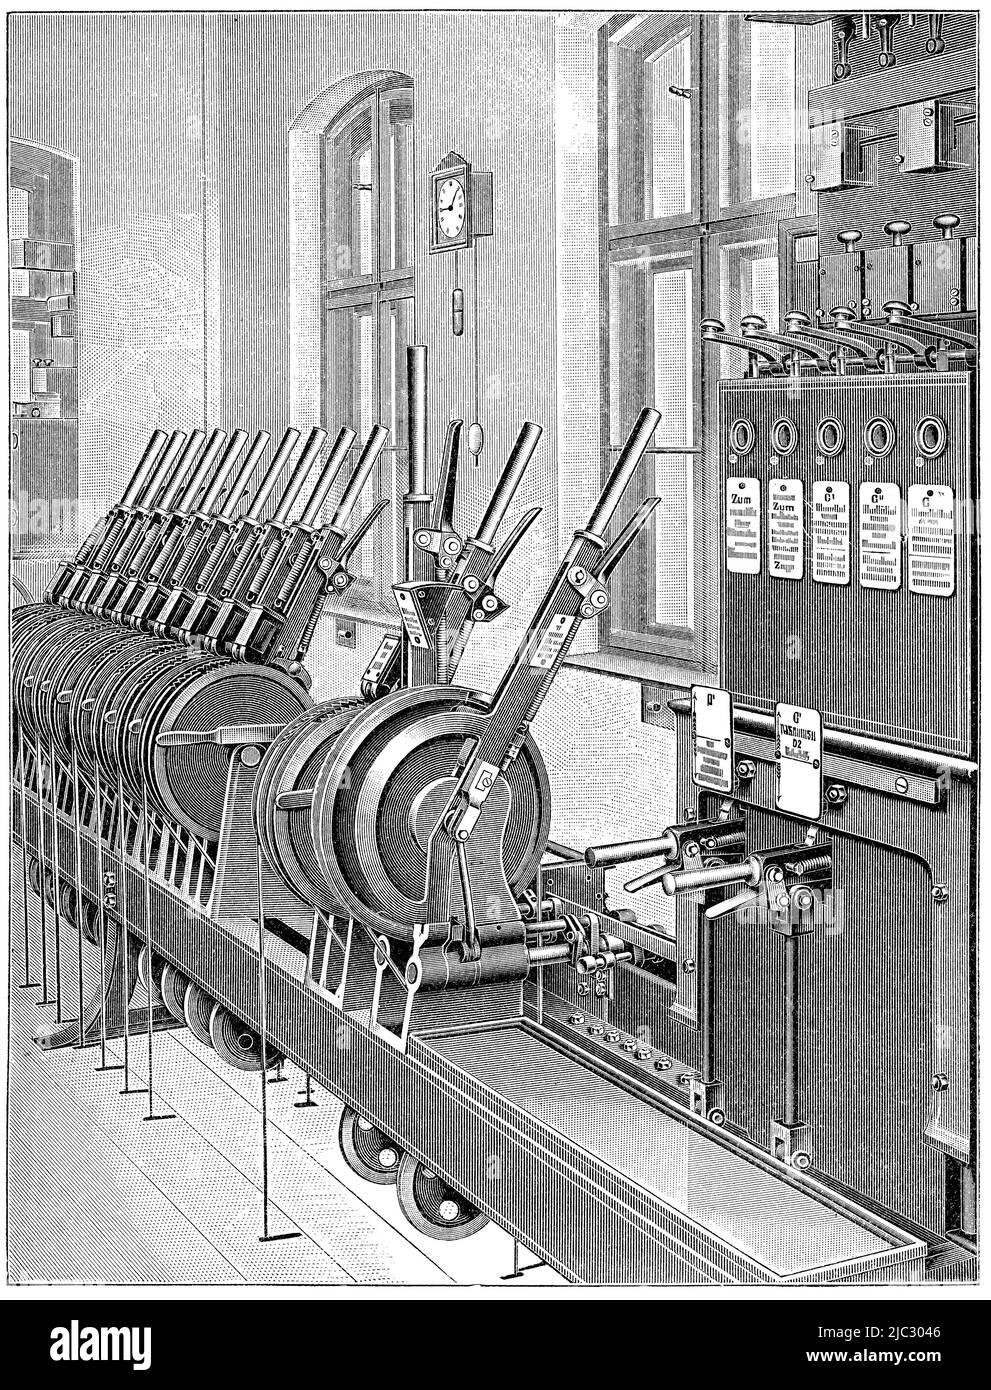 Railway equipment - Lever mechanism by Stahmer. Publication of the book 'Meyers Konversations-Lexikon', Volume 2, Leipzig, Germany, 1910 Stock Photo